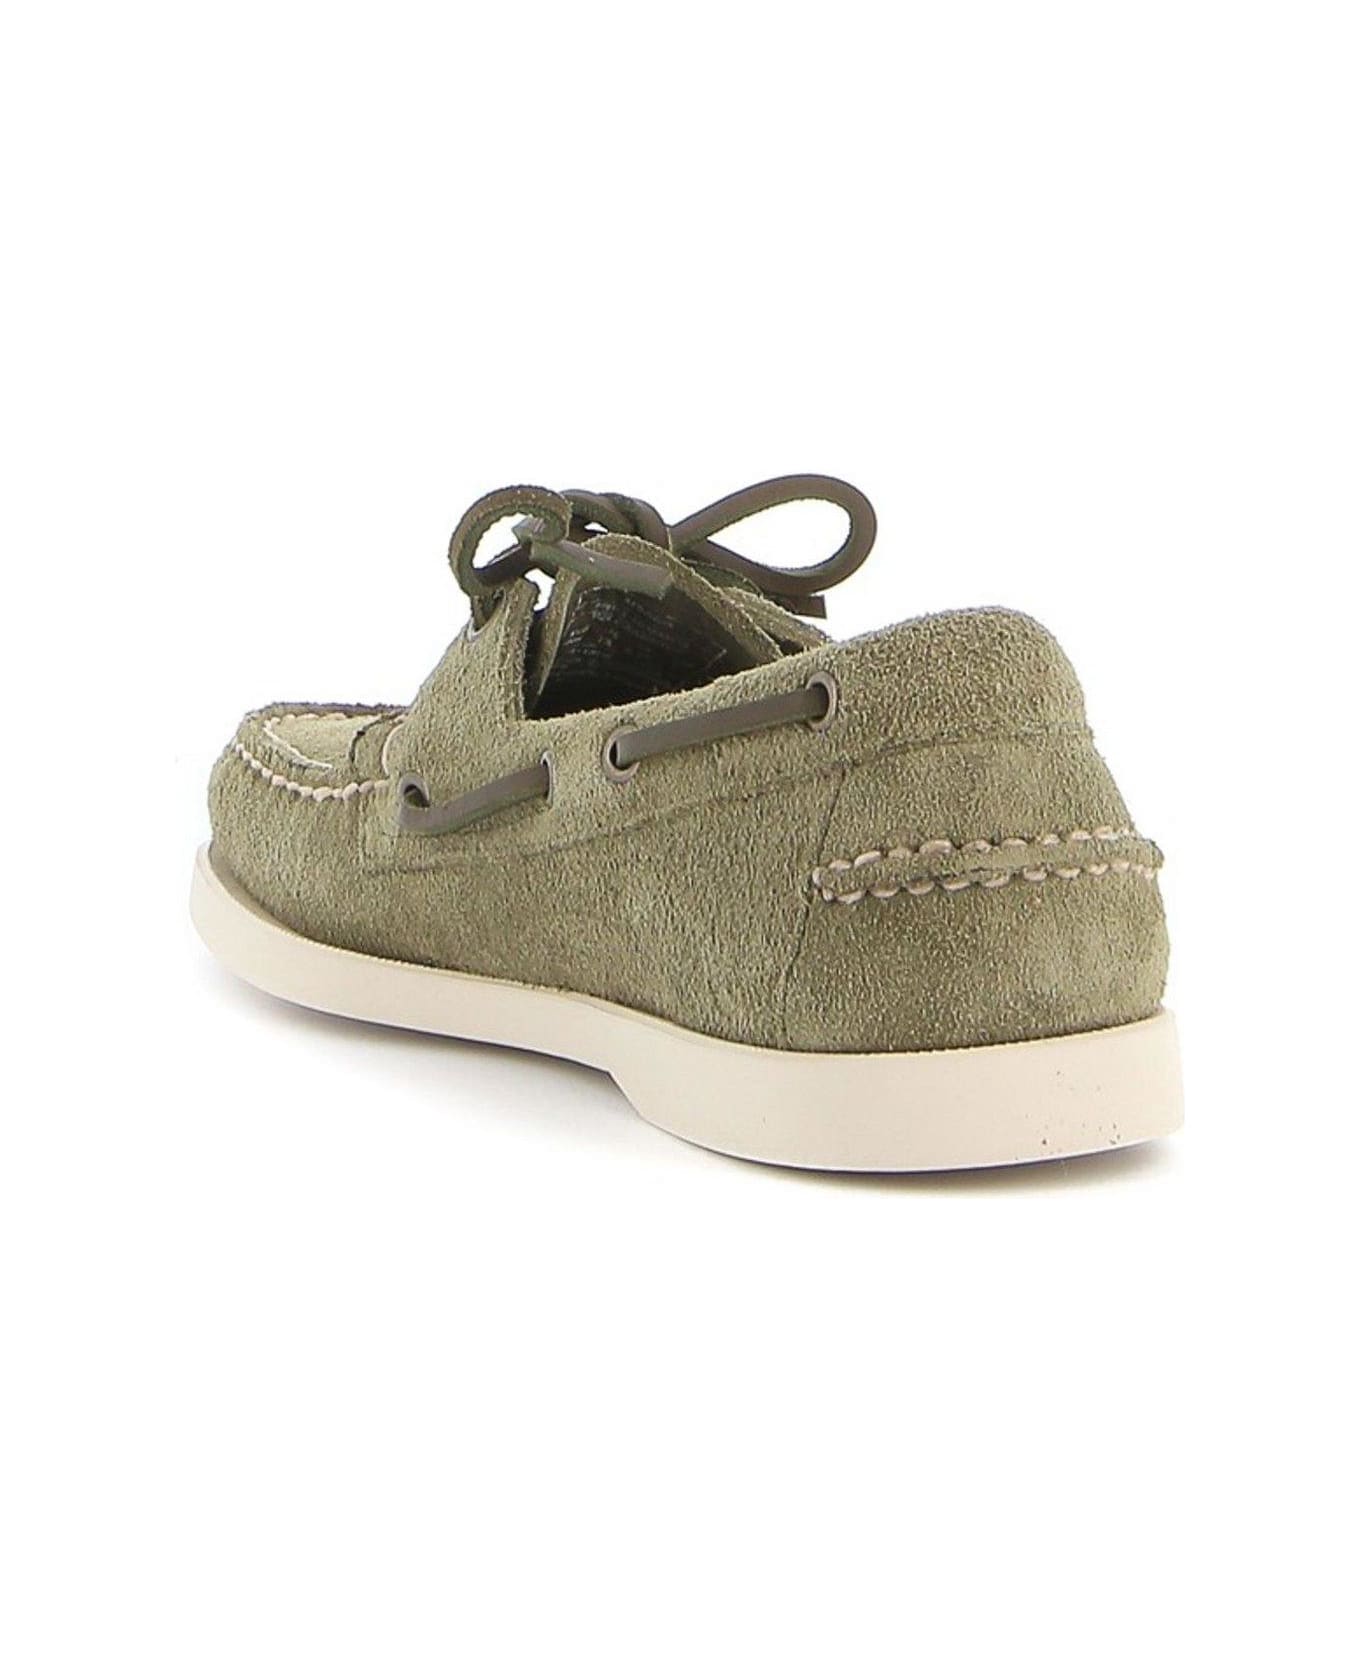 Sebago Lace-up Round Toe Boat Shoes - Green Military